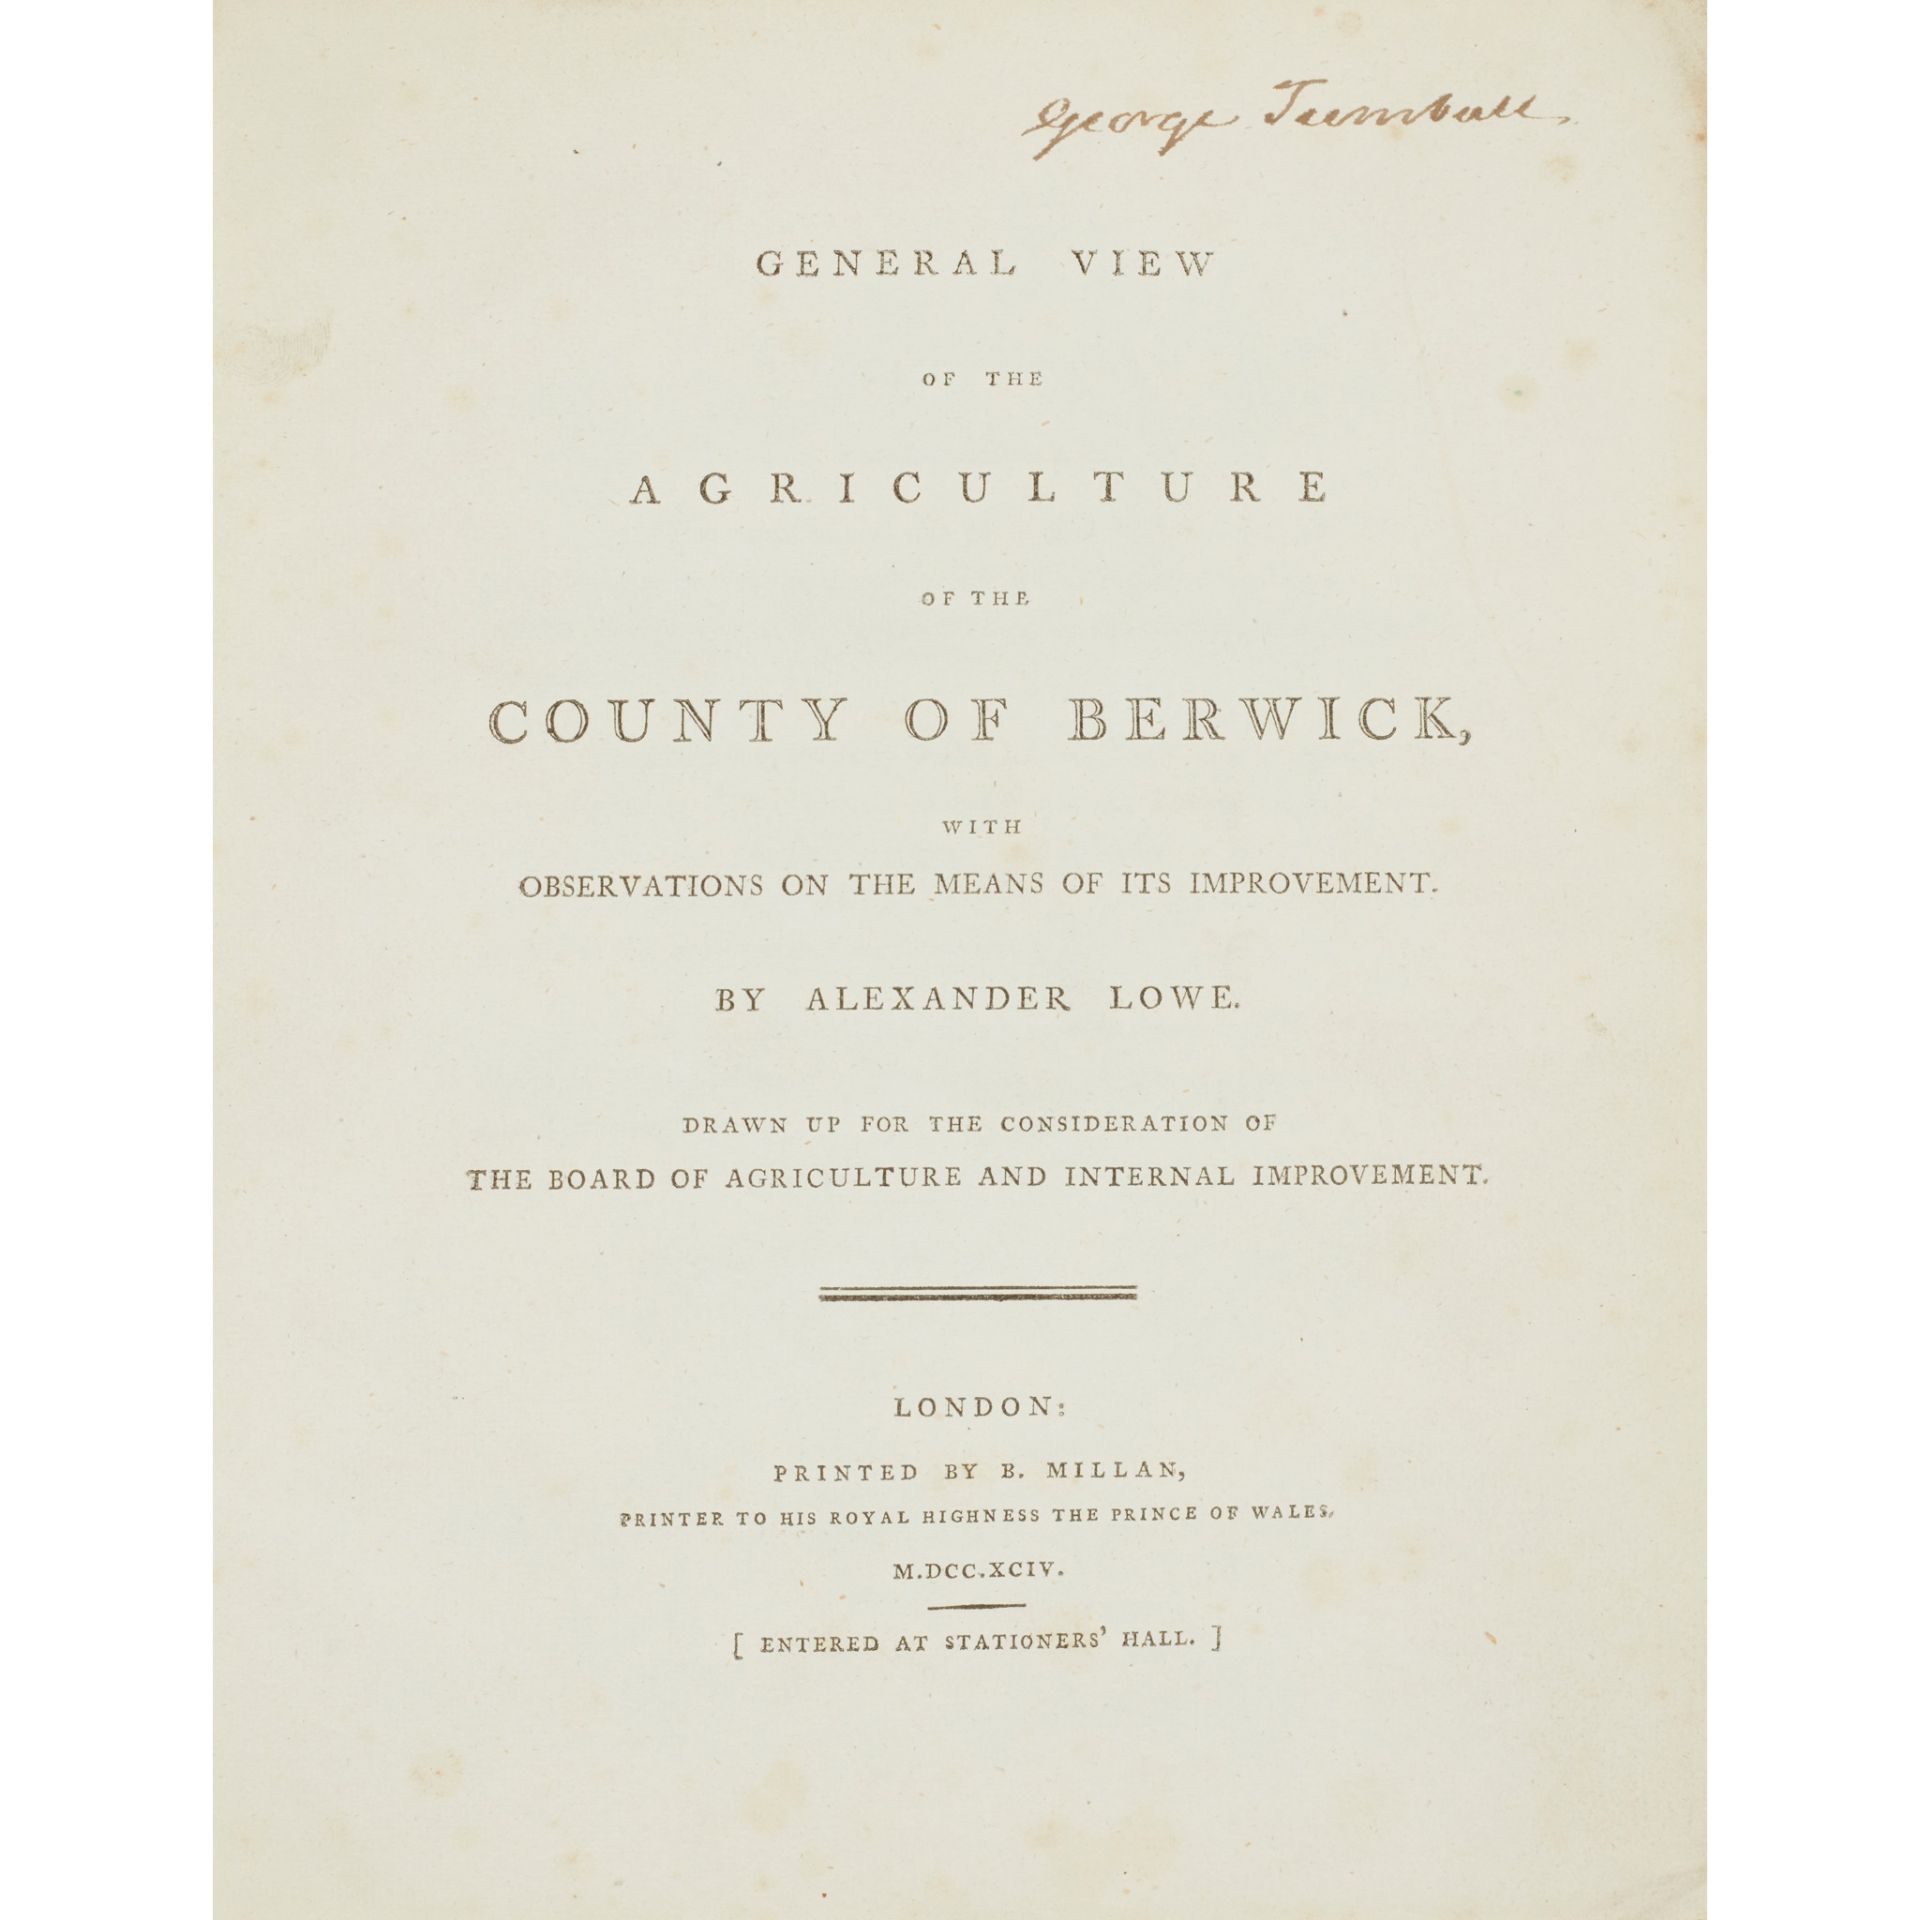 A General View of Agriculture 7 volumes - Image 2 of 2